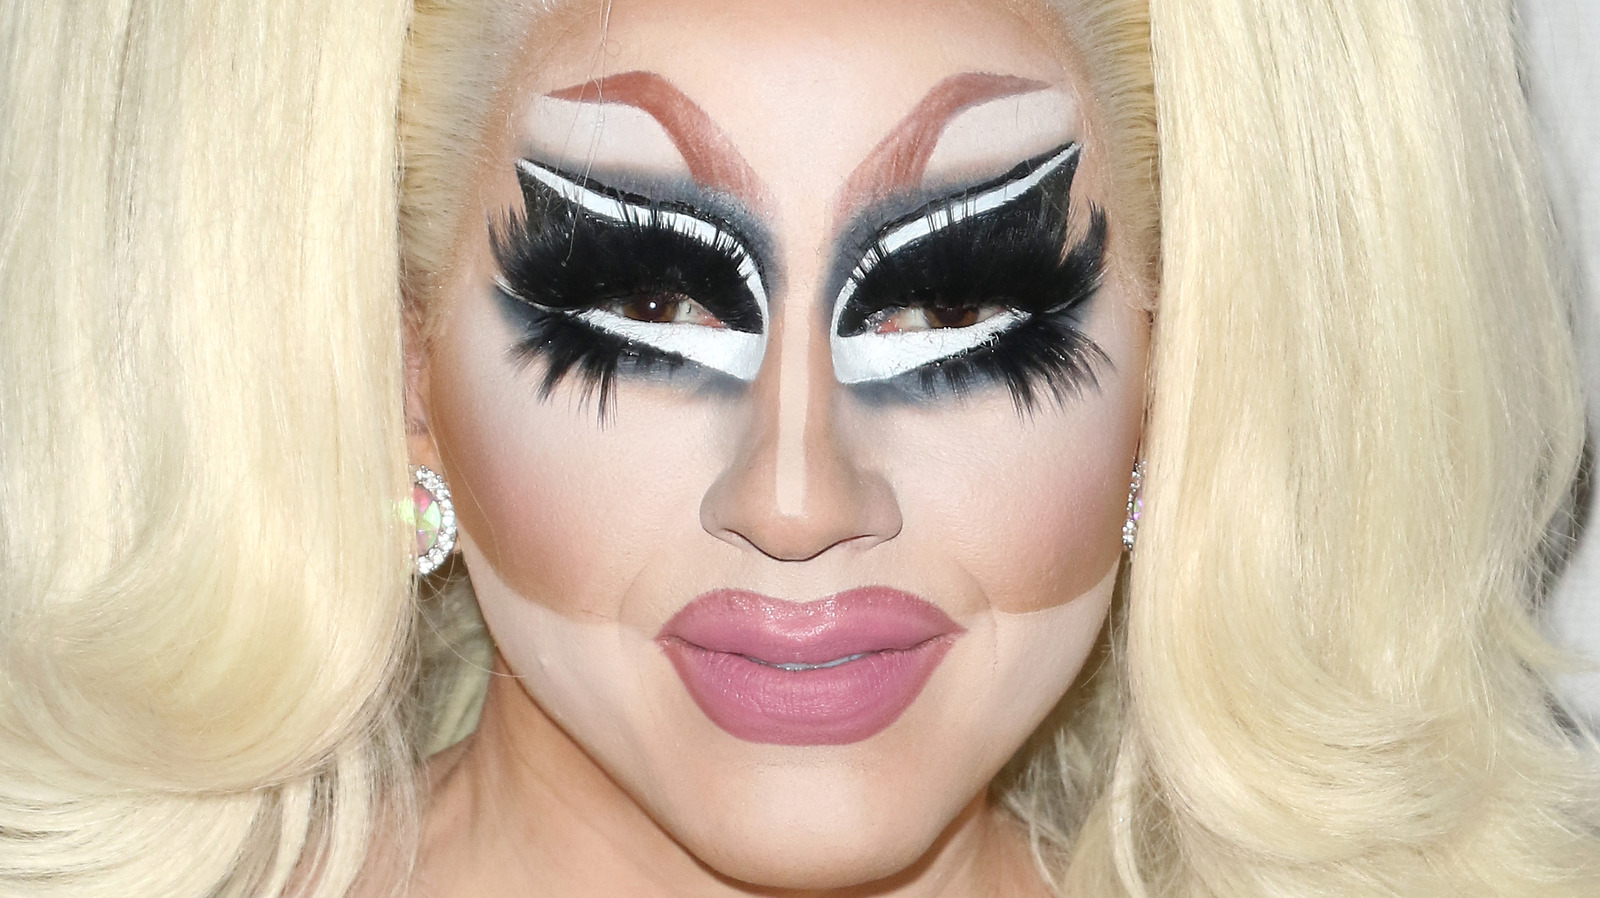 How Much Do The Contestants On RuPaul’s Drag Race Make Per Episode?